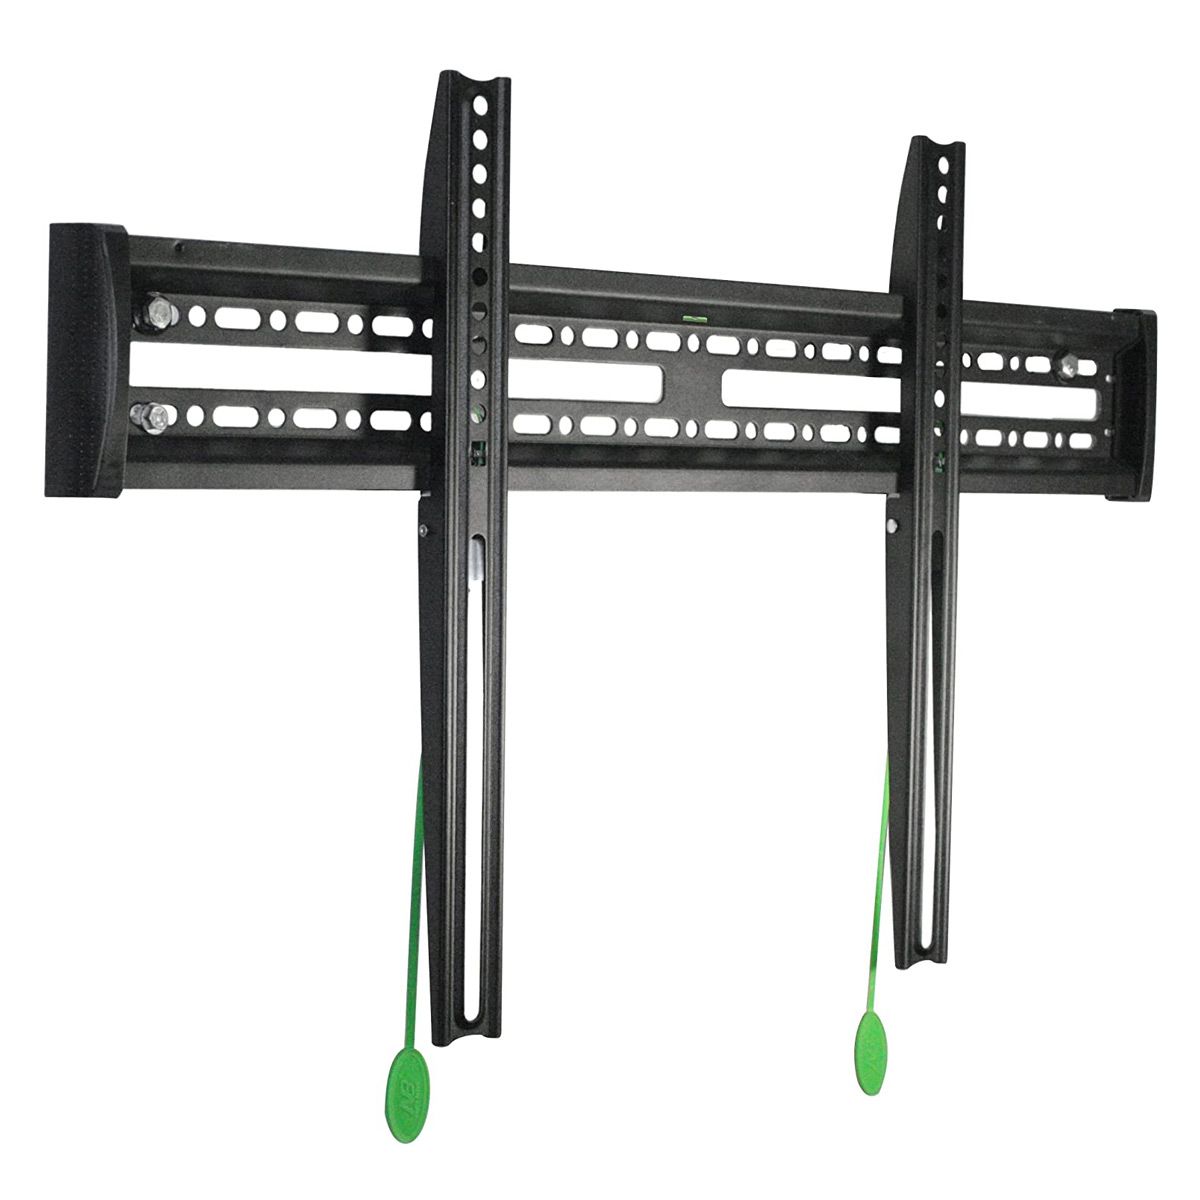 NB-C3-F-SPCC-Universal-40-60in-Fixed-Flat-Panel-LCD-LED-TV-Wall-Mount-TV-Holder-Load-567kg-1730898